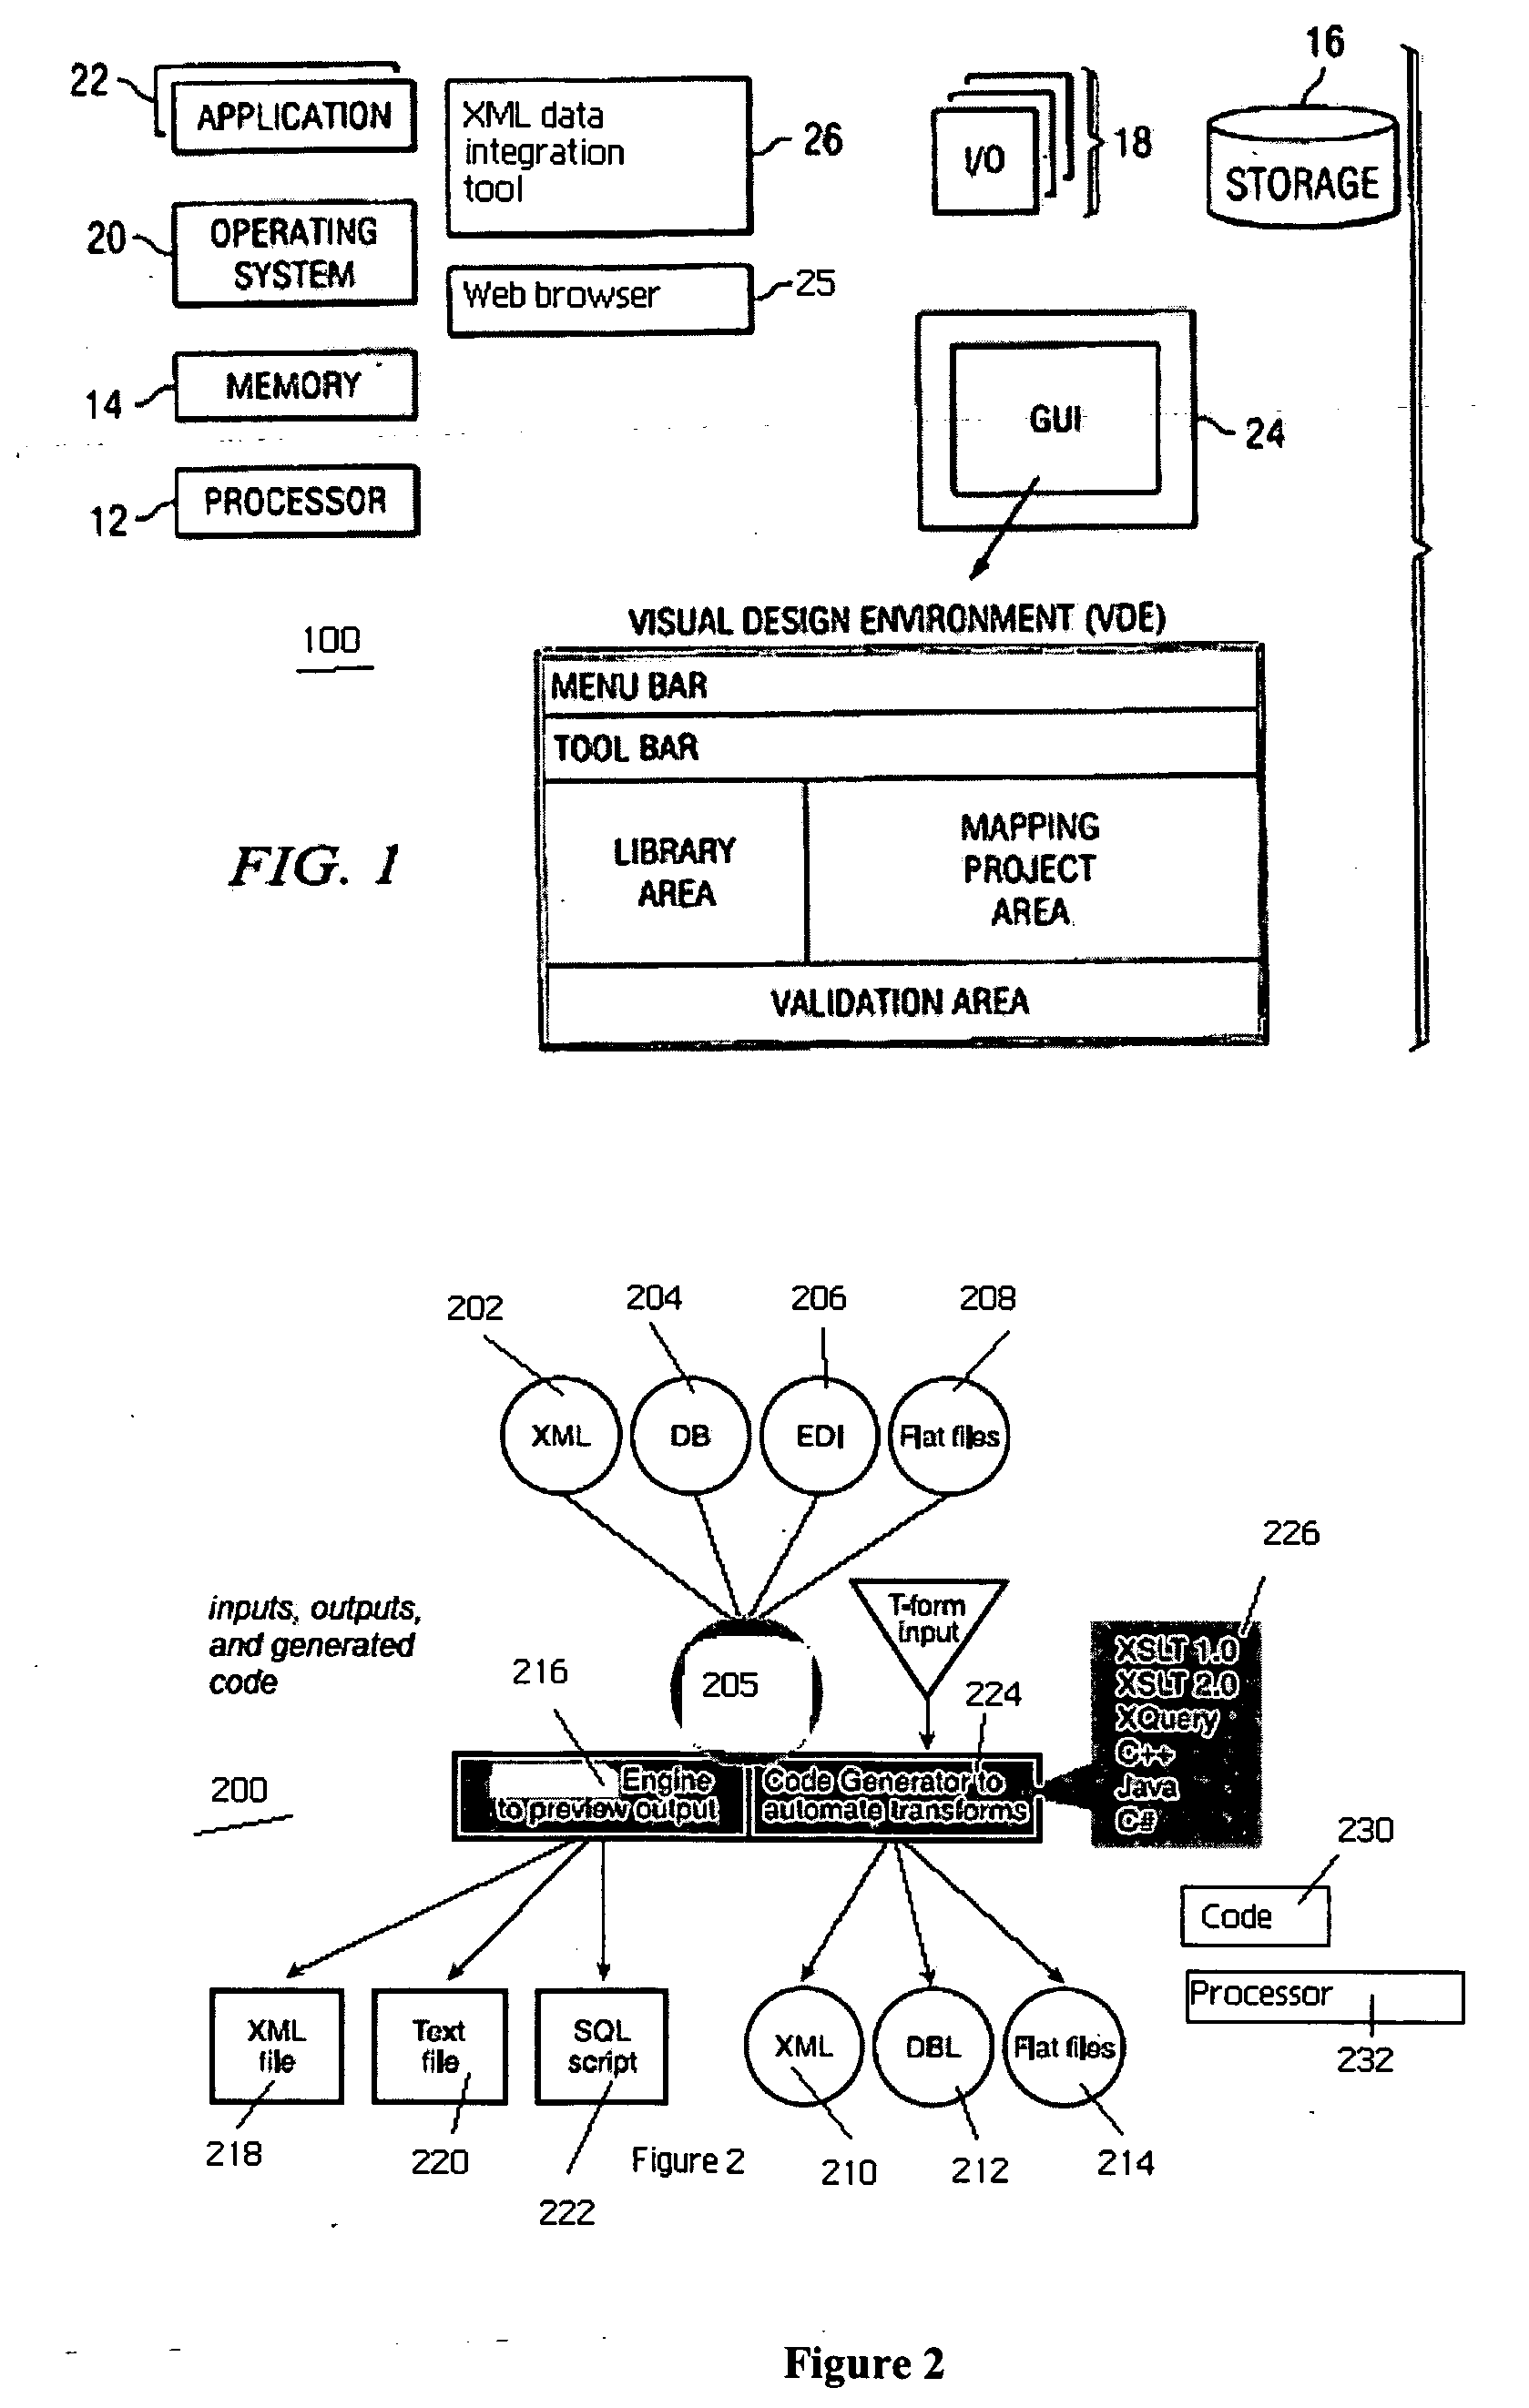 System for describing text file formats in a flexible, reusable way to facilitate text file transformations